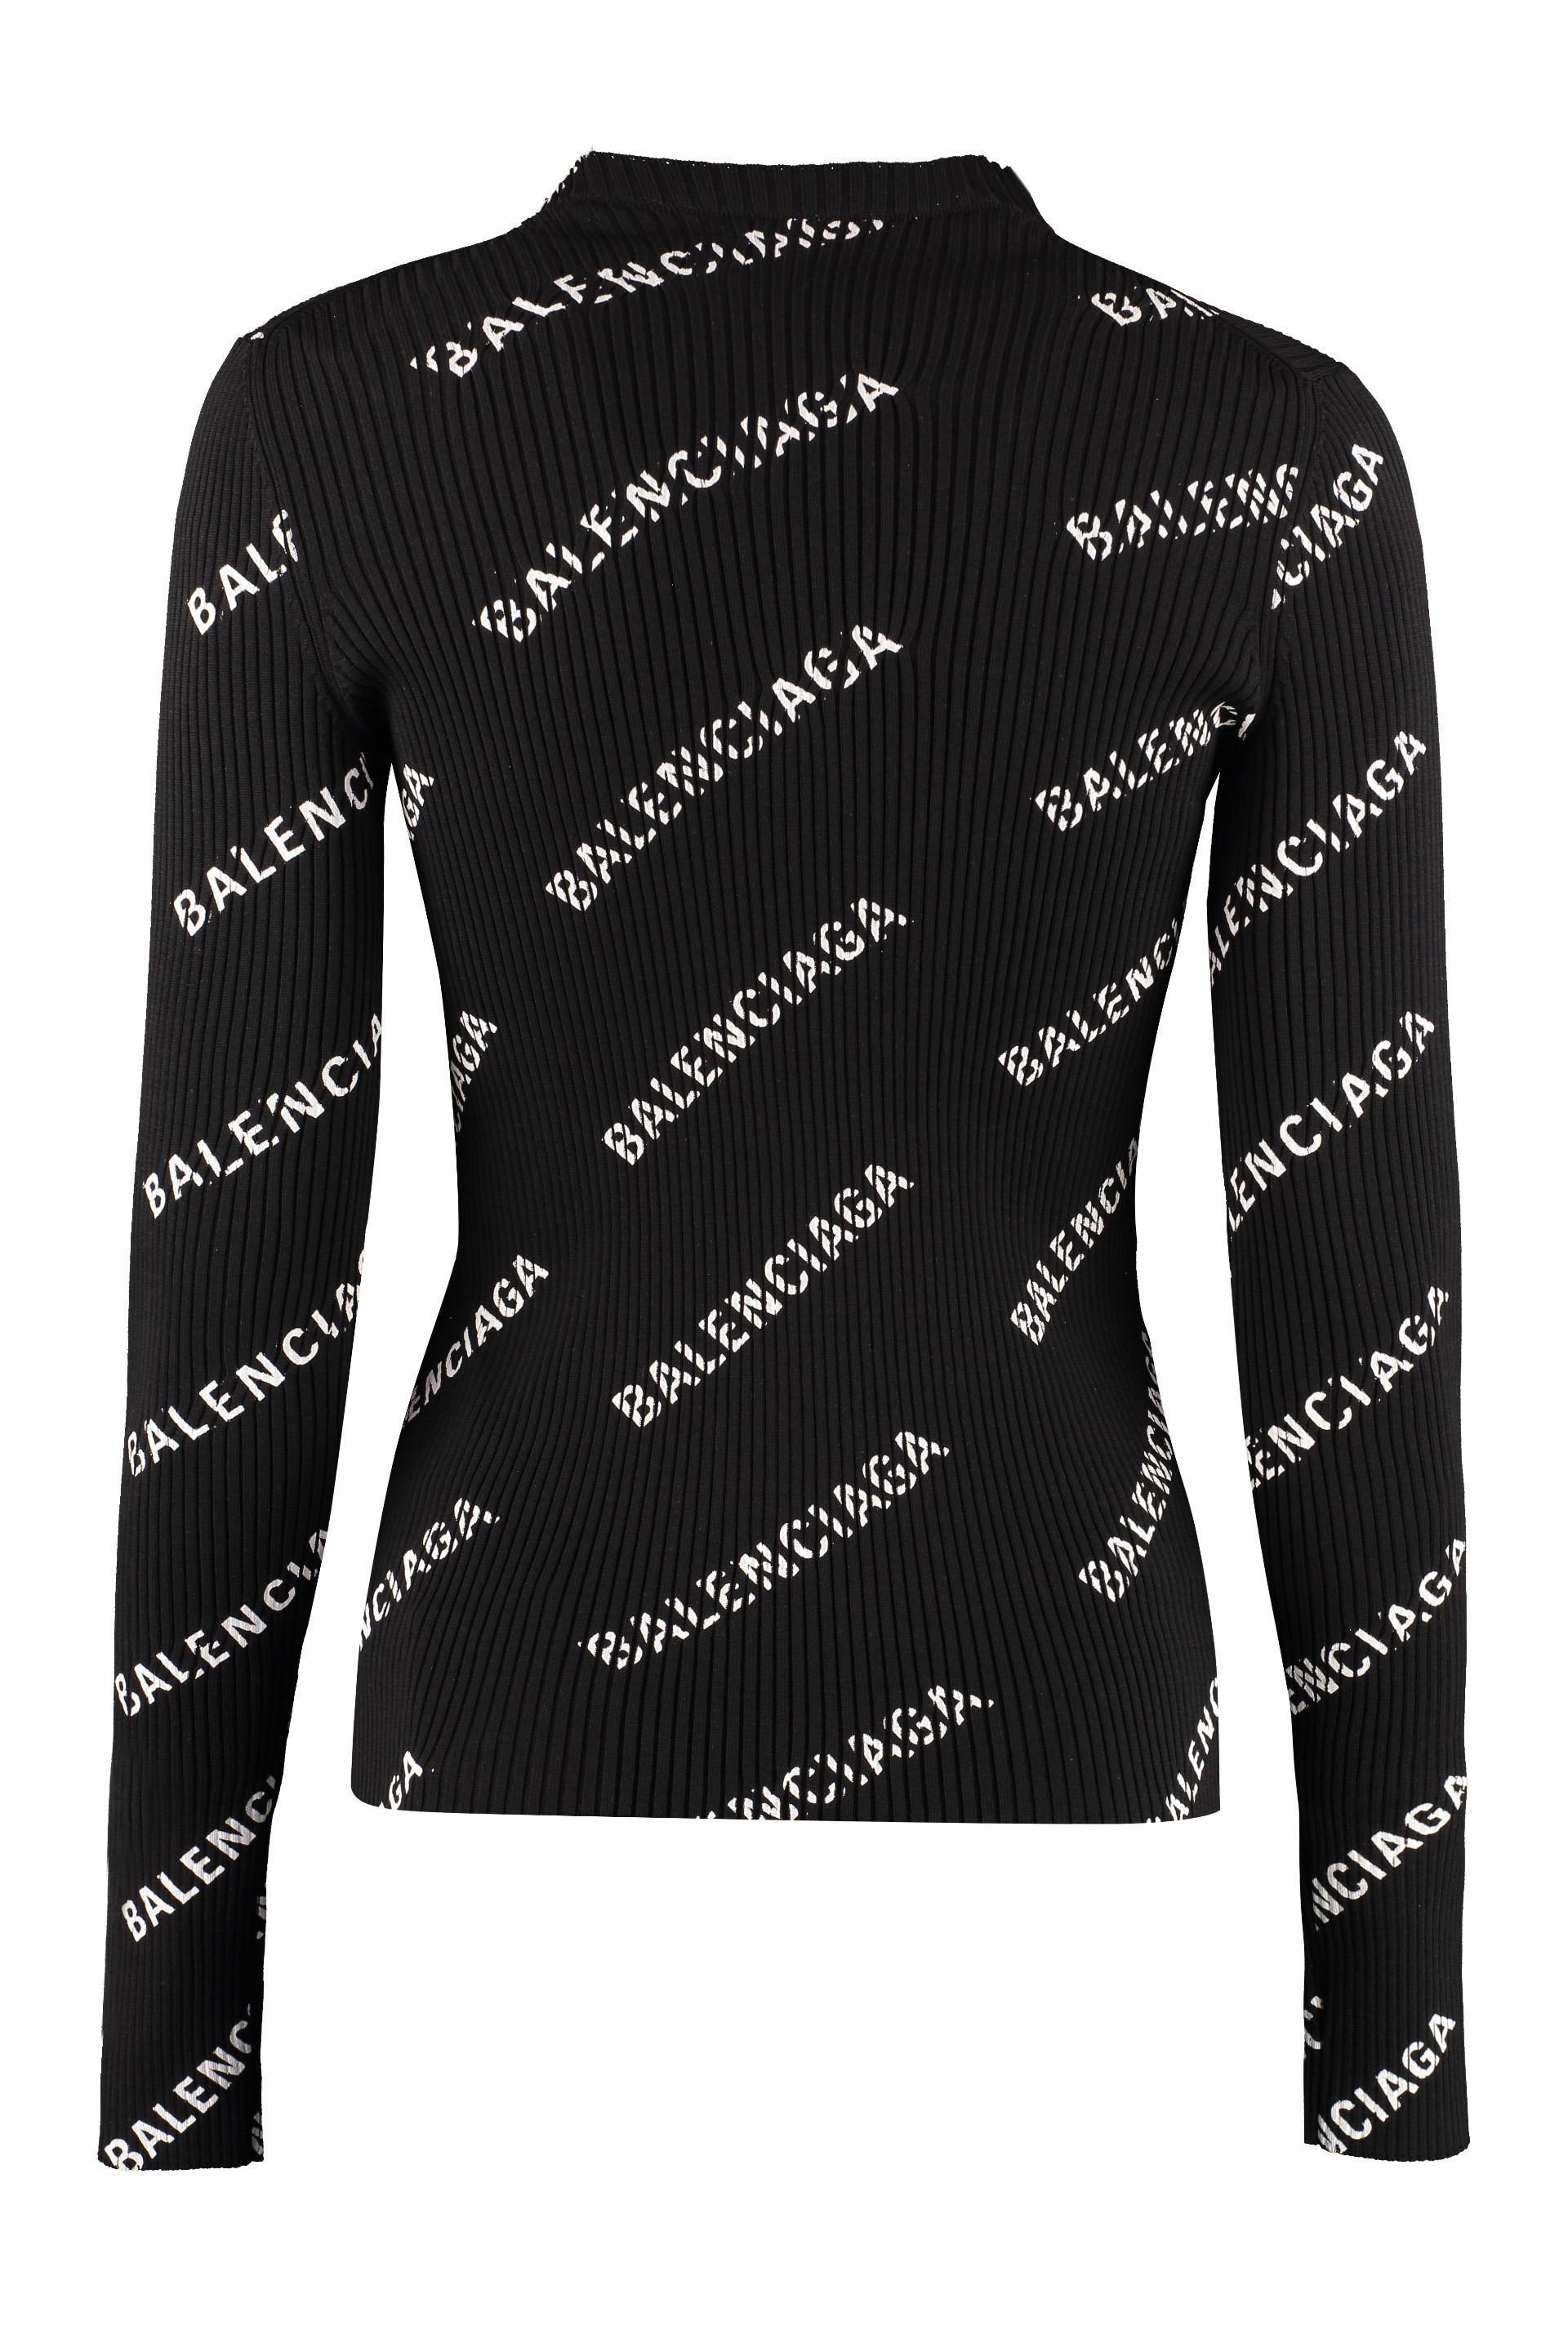 Balenciaga Printed Ribbed-knit Sweater in Black | Lyst